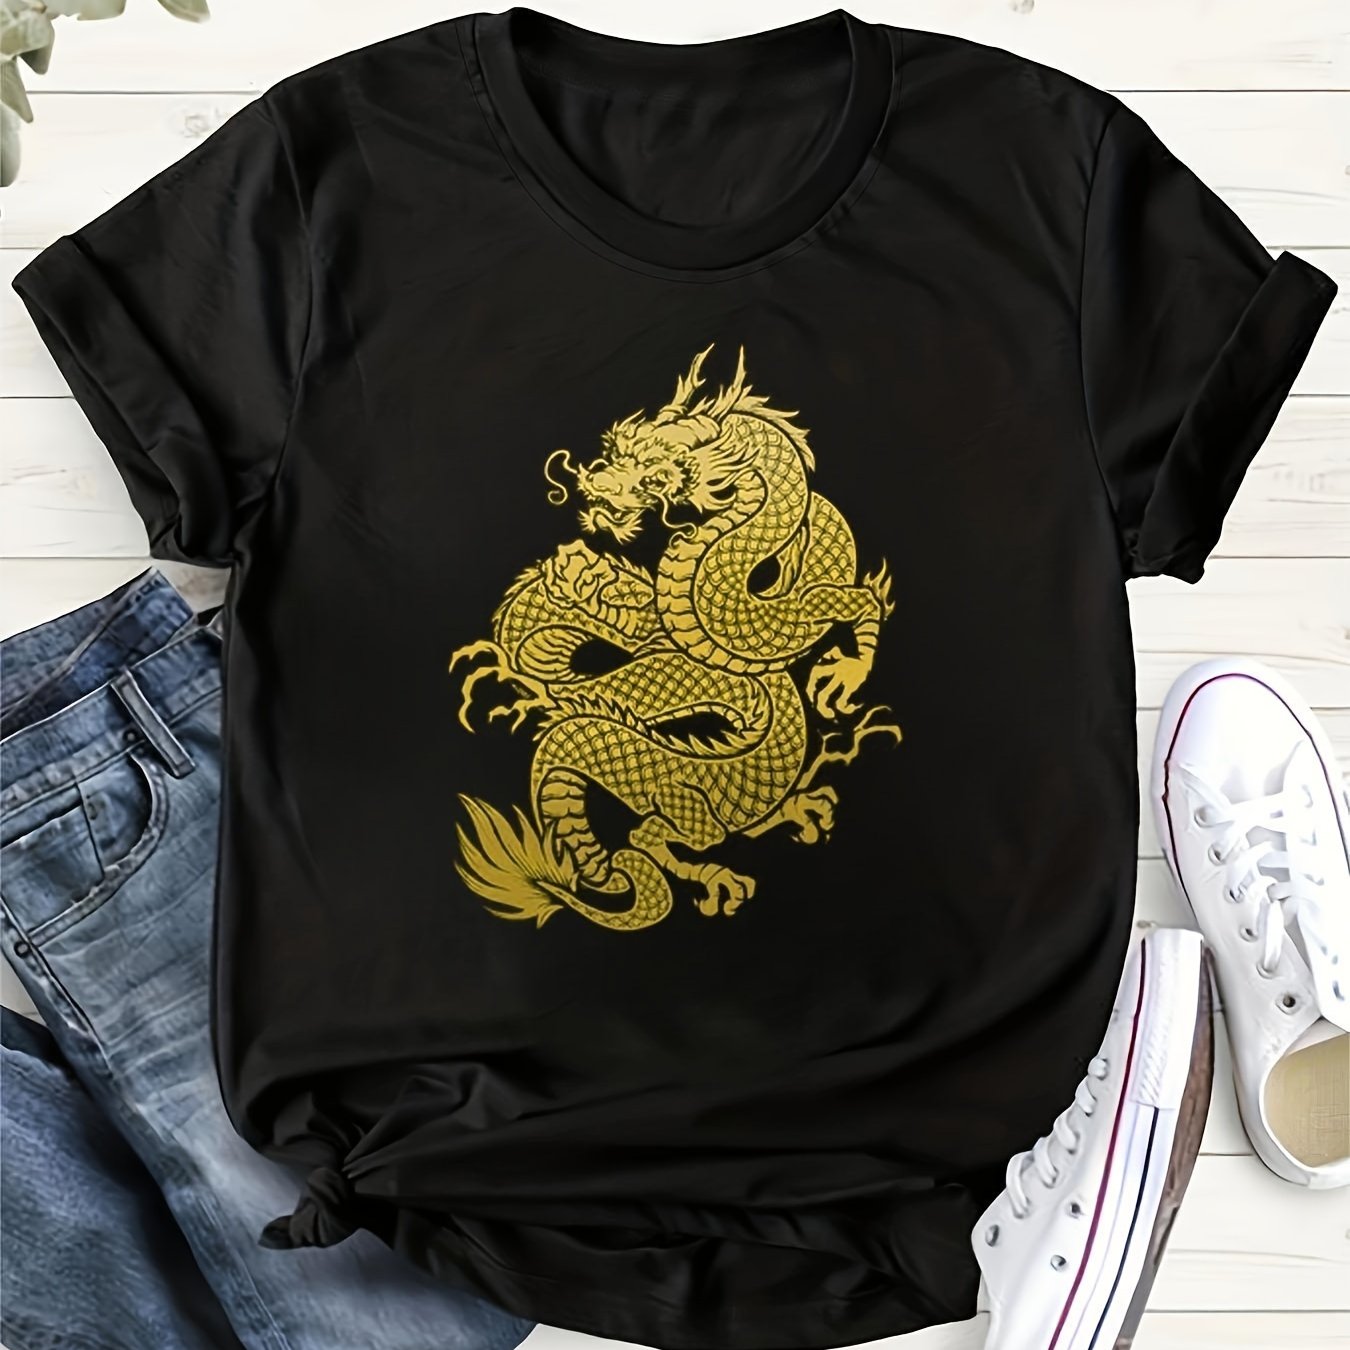 Dragon Print Crew Neck T-Shirt, Casual Short Sleeve Top For Spring & Summer, Women's Clothing